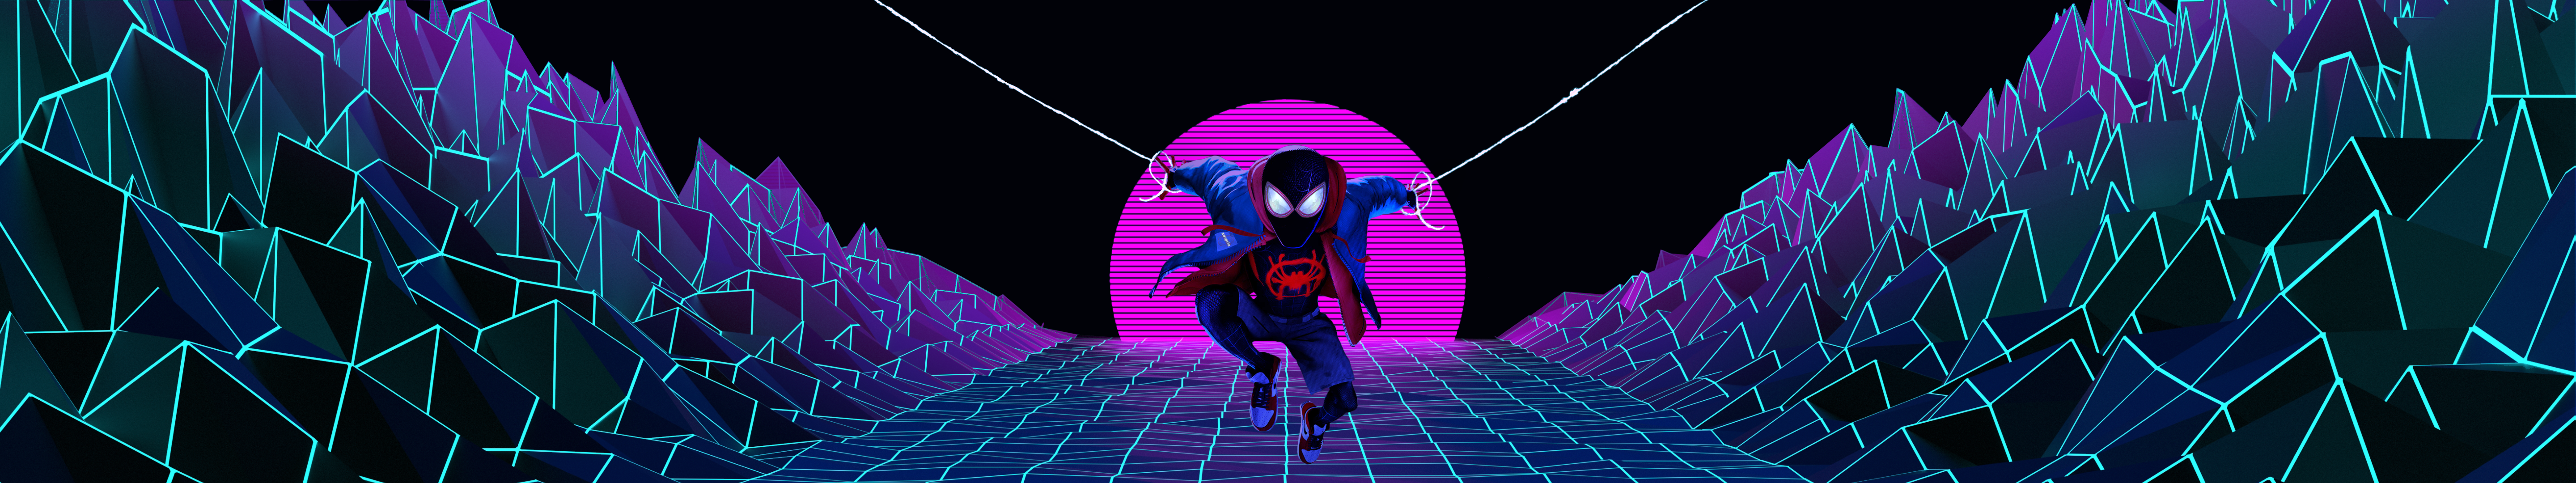 Spider Man Into The Spiderverse Neon Time Travel Web Comic 1980s Wide Angle Multiple Display Ultra W 5760x1080